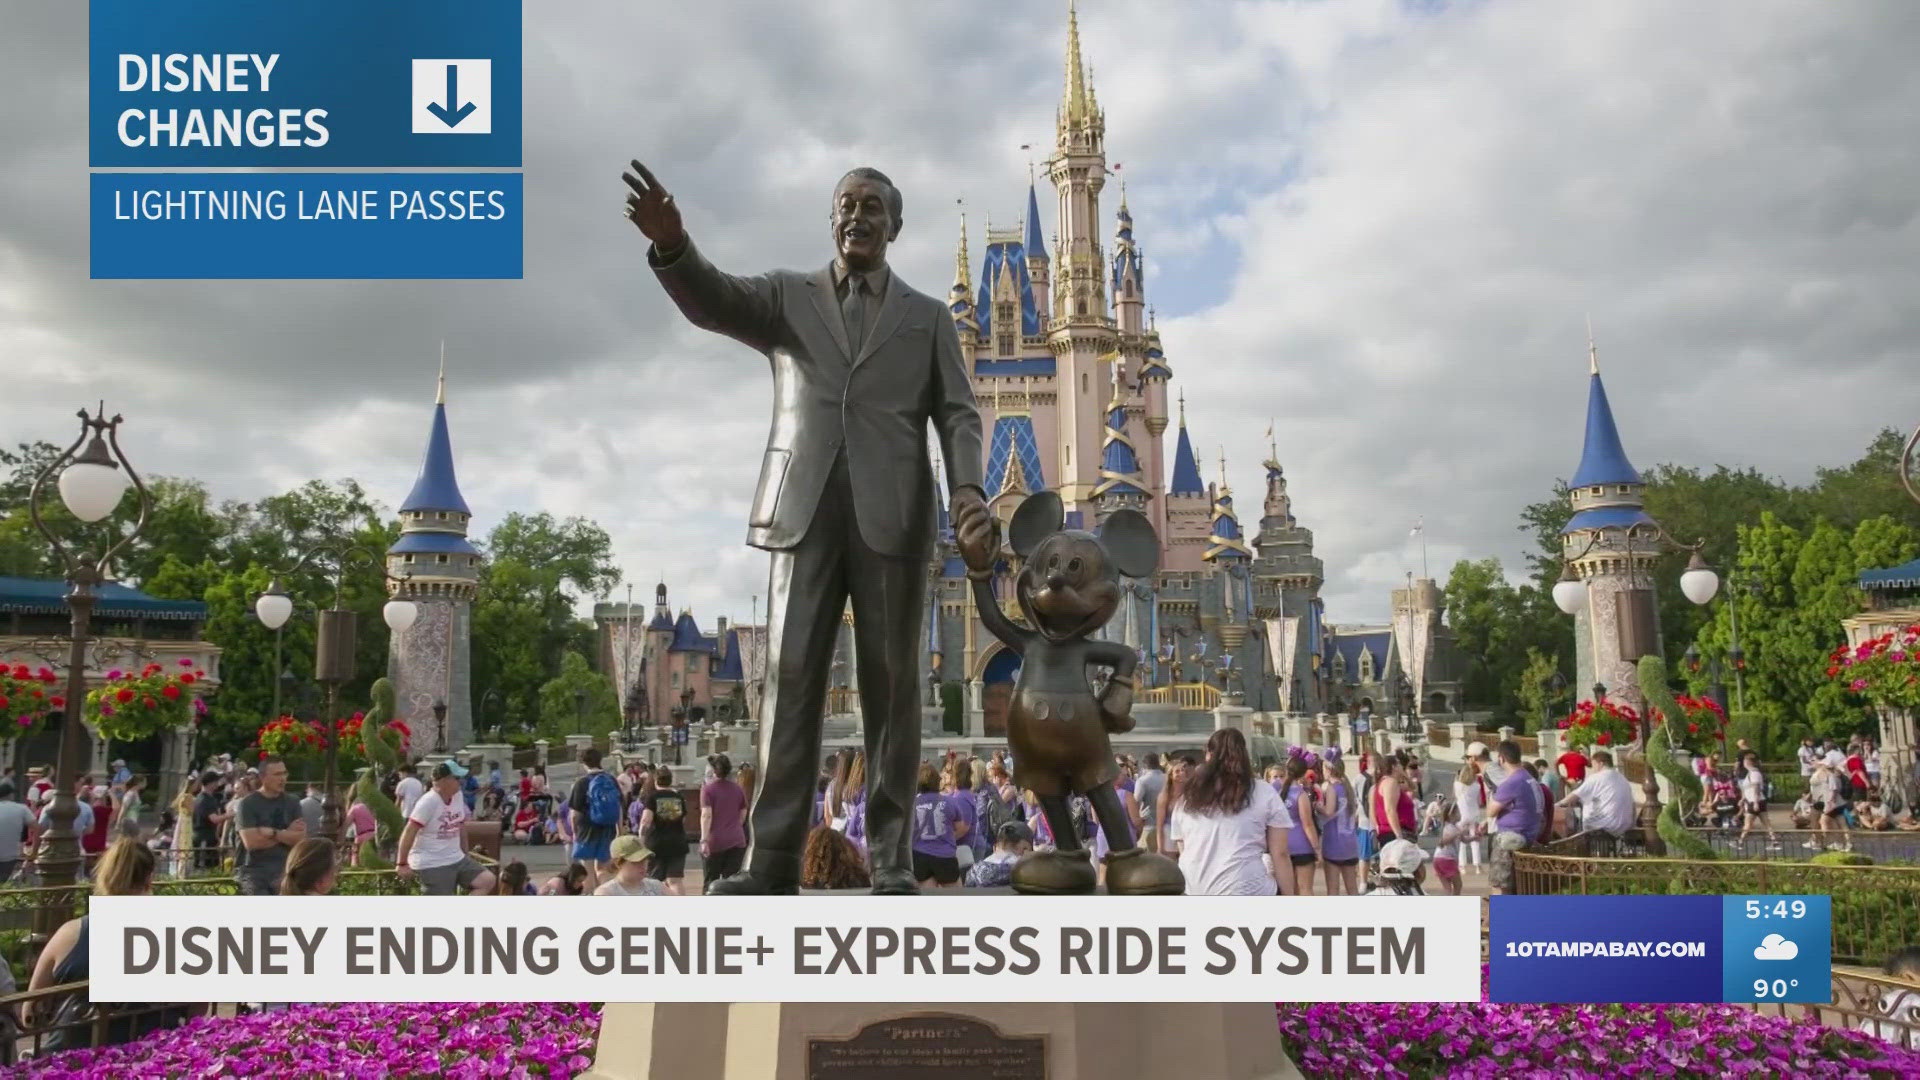 The new fast pass system will go into effect July 24.